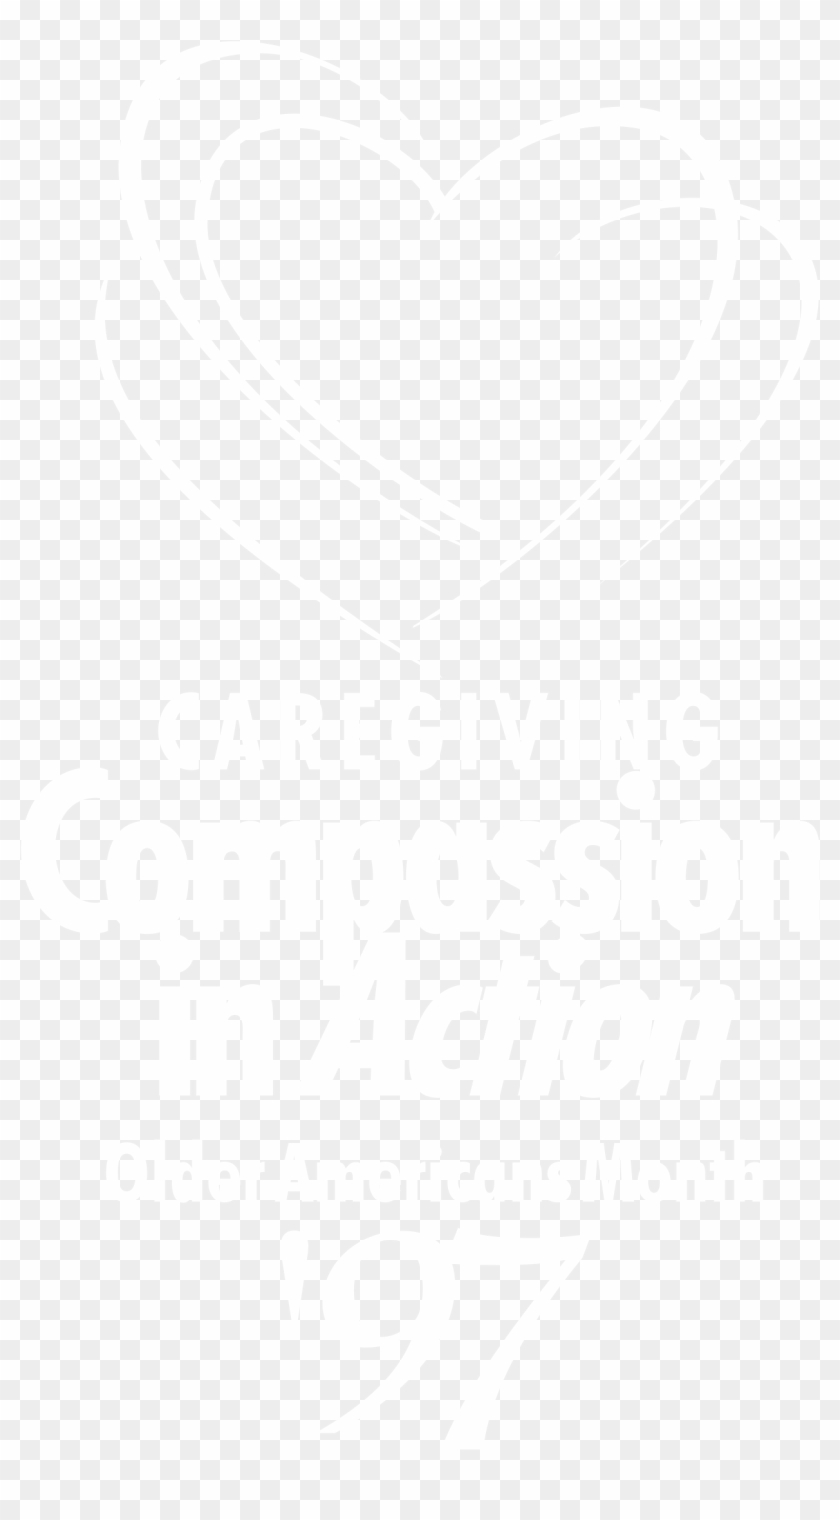 Caregiving Compassion In - Ihs Markit Logo White Clipart #3207267